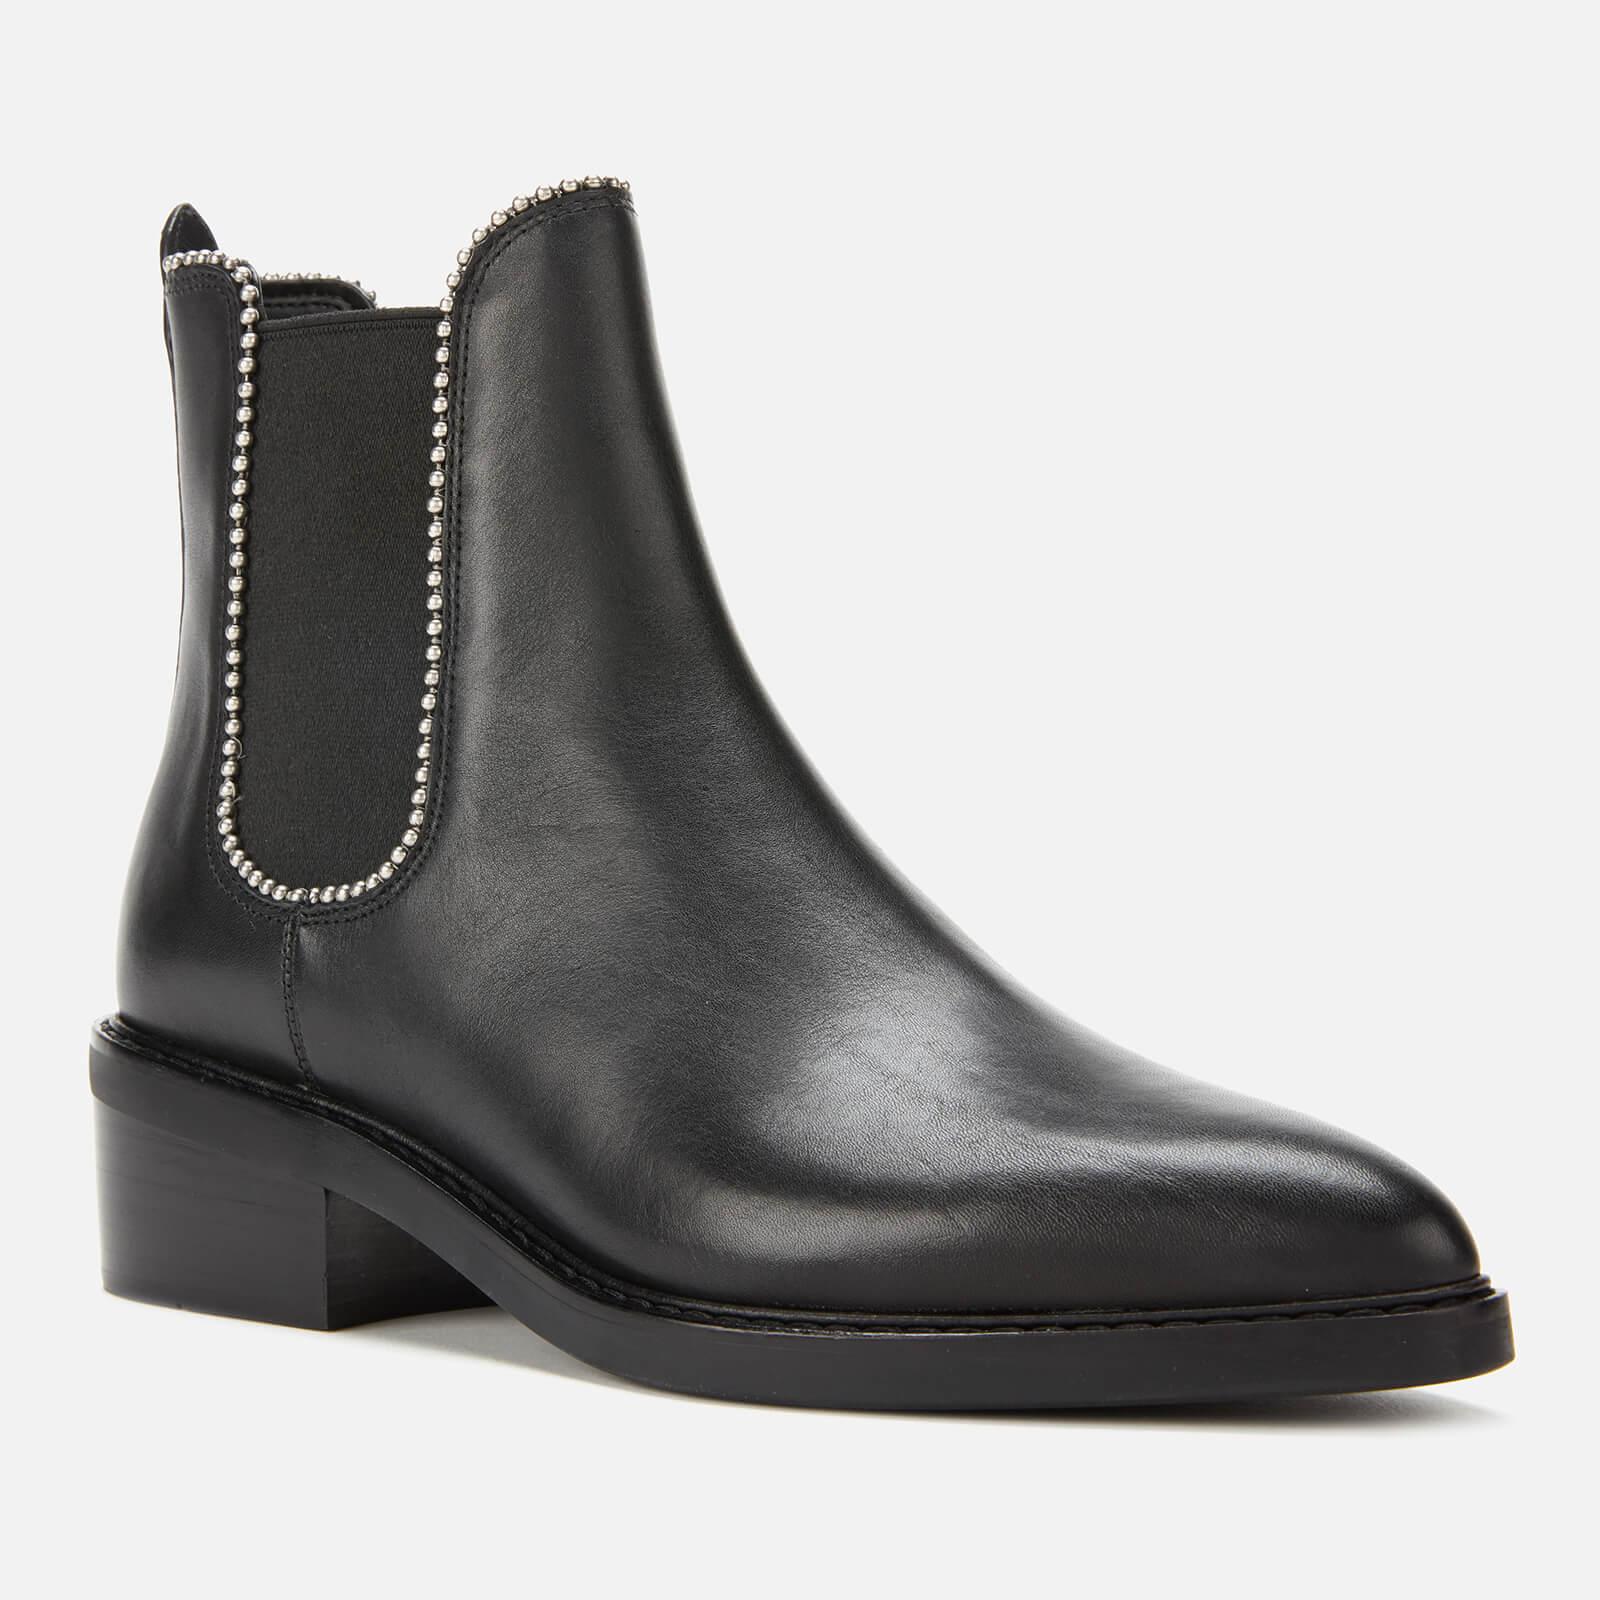 COACH Bowery Beadchain Leather Ankle Boots in Black - Lyst